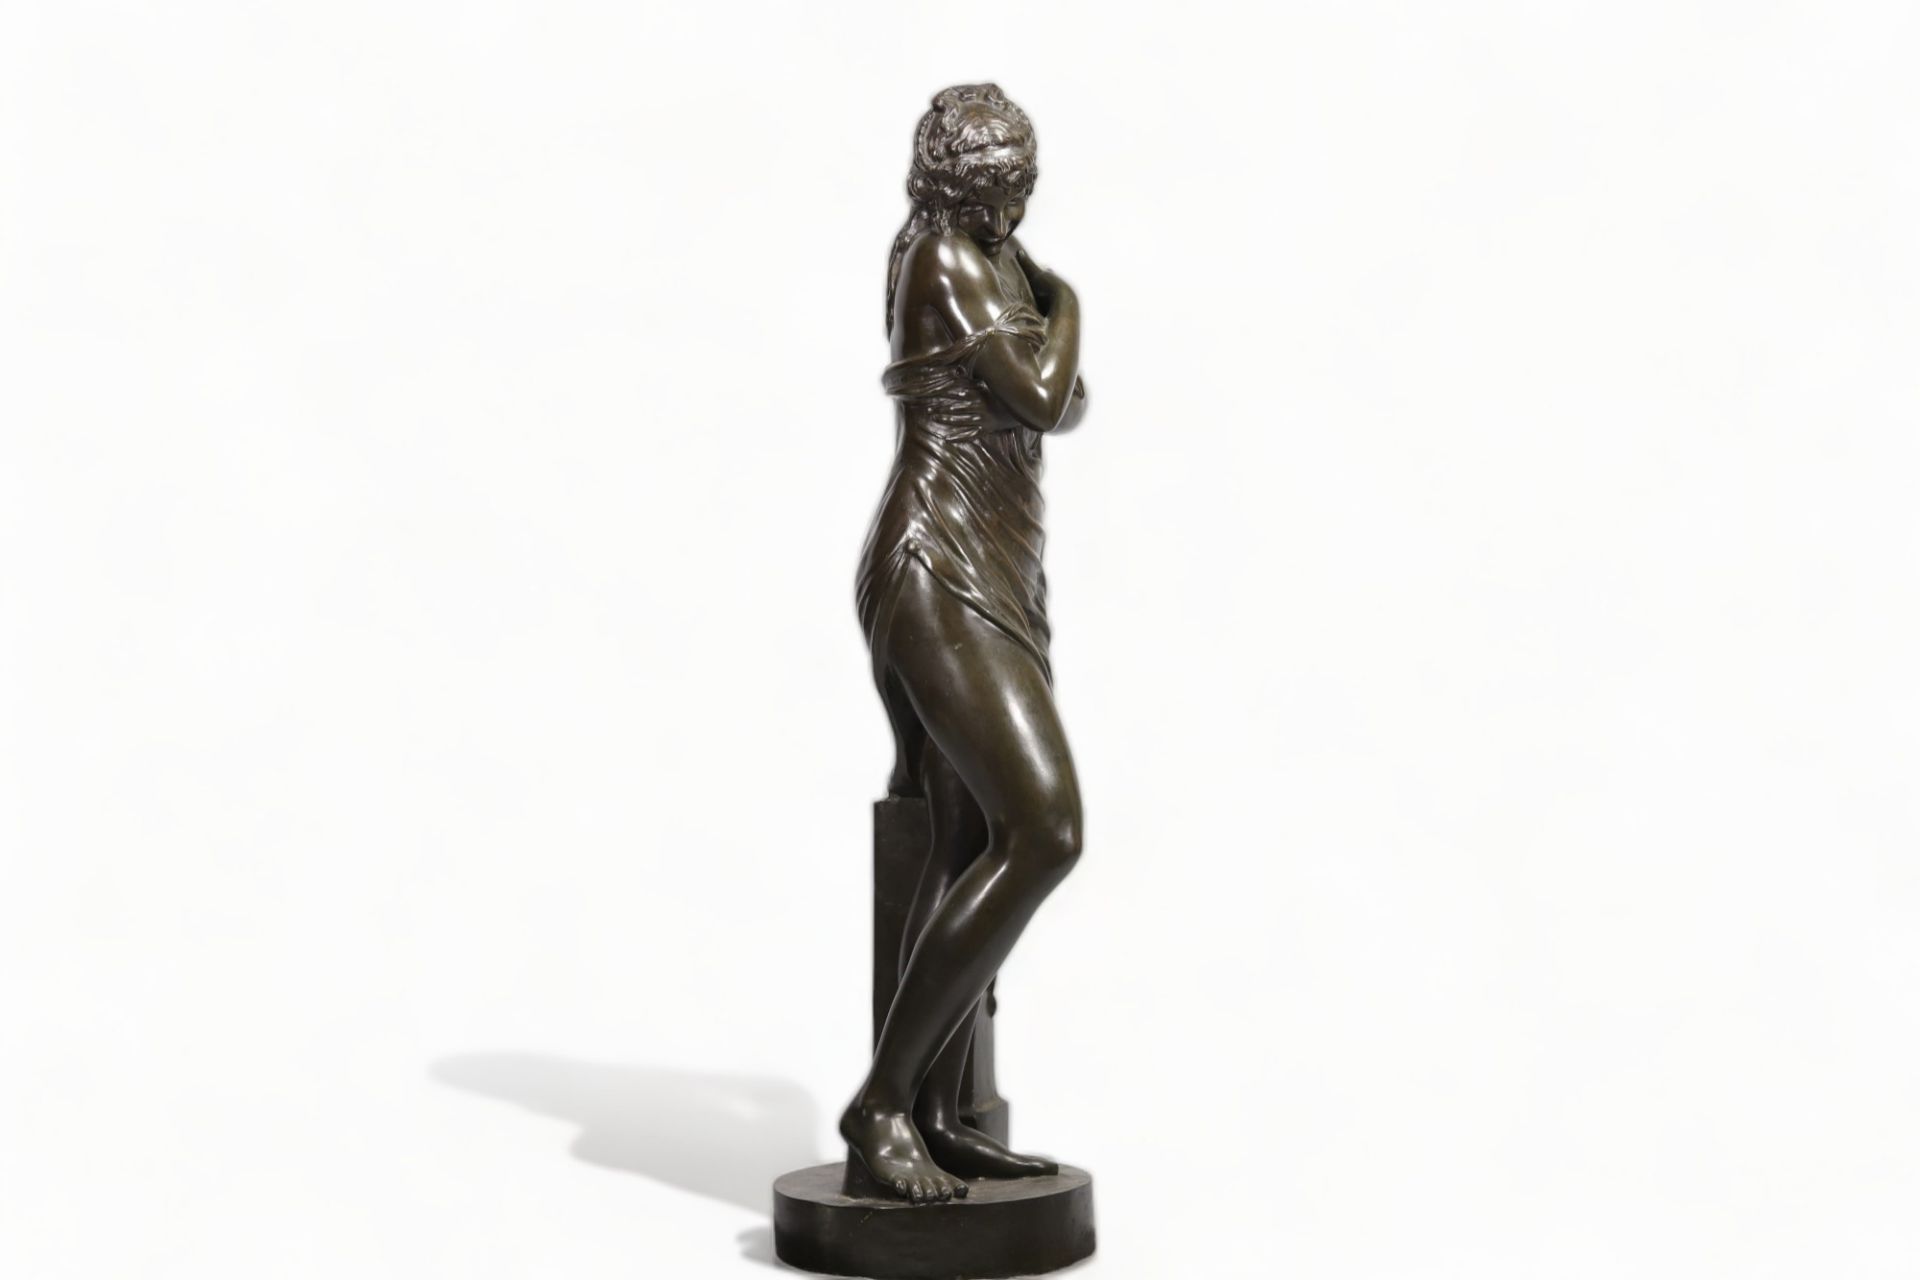 Jean-Antoine HOUDON (1741-1828) (after) "La frileuse" ("the chilly one")Â an imposing sculpture in b - Image 4 of 5